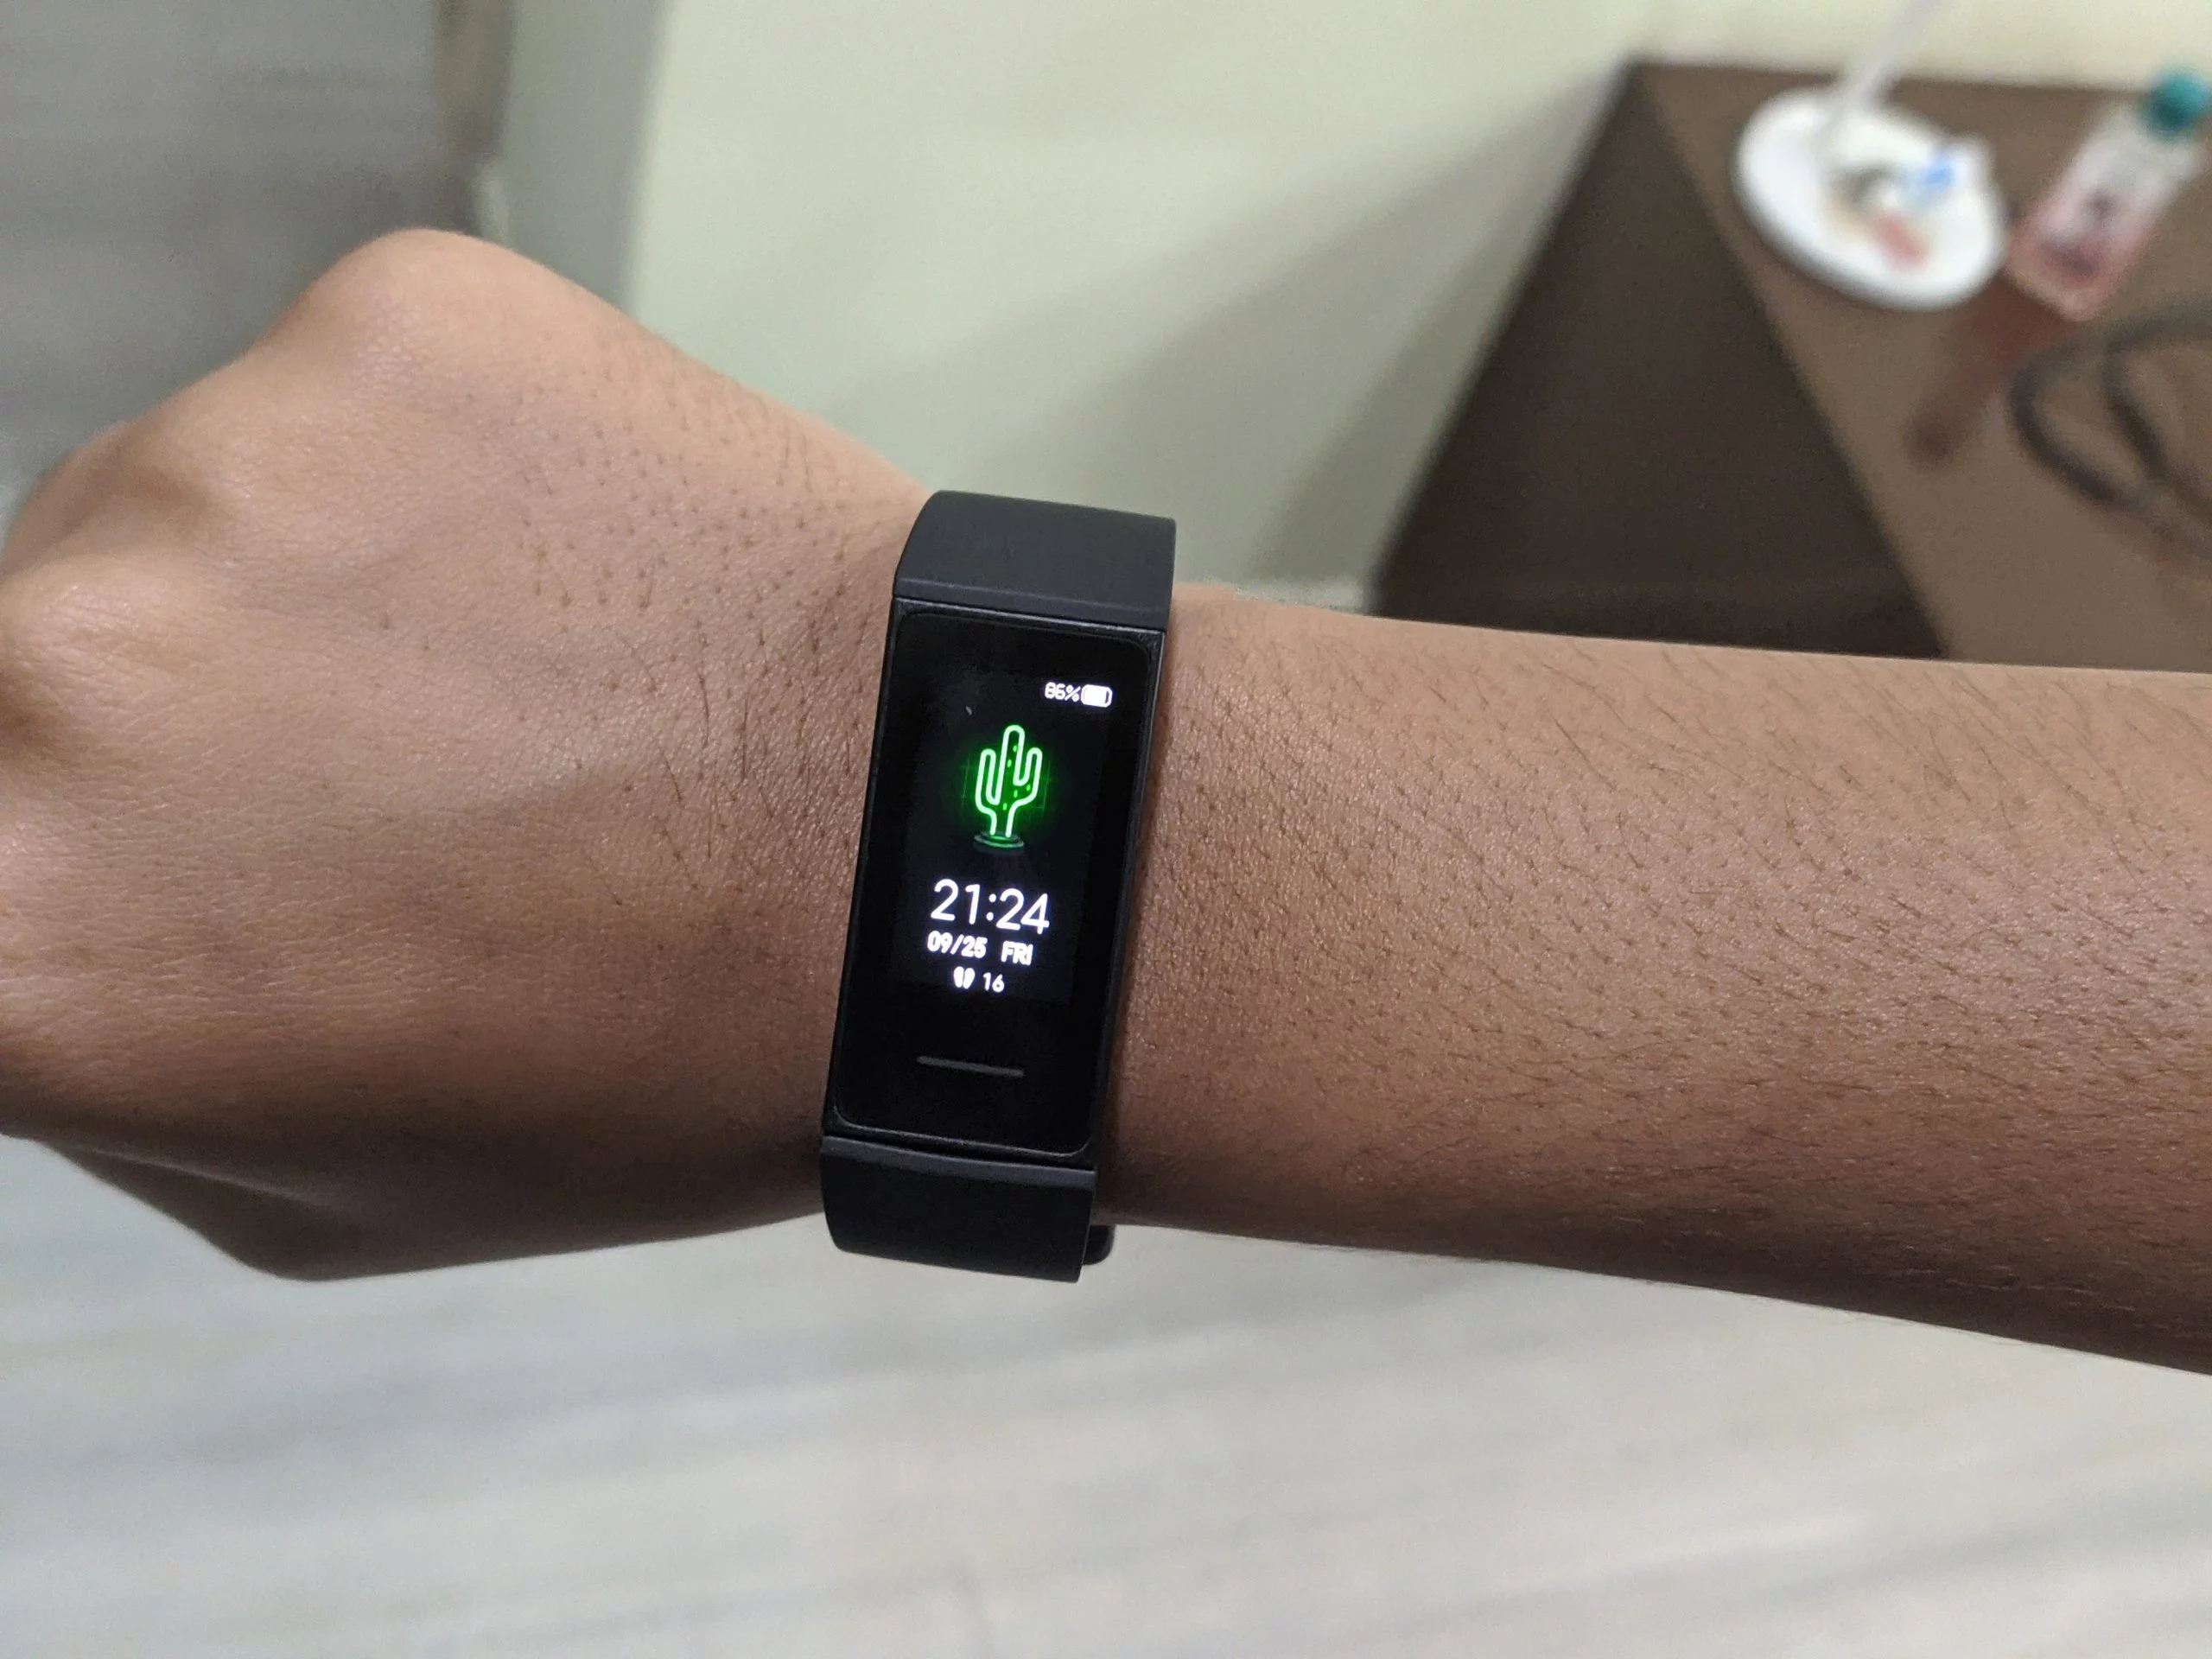 Xiaomi Mi Smart Band 4 Impressions: All The Fitness Tracker You Need